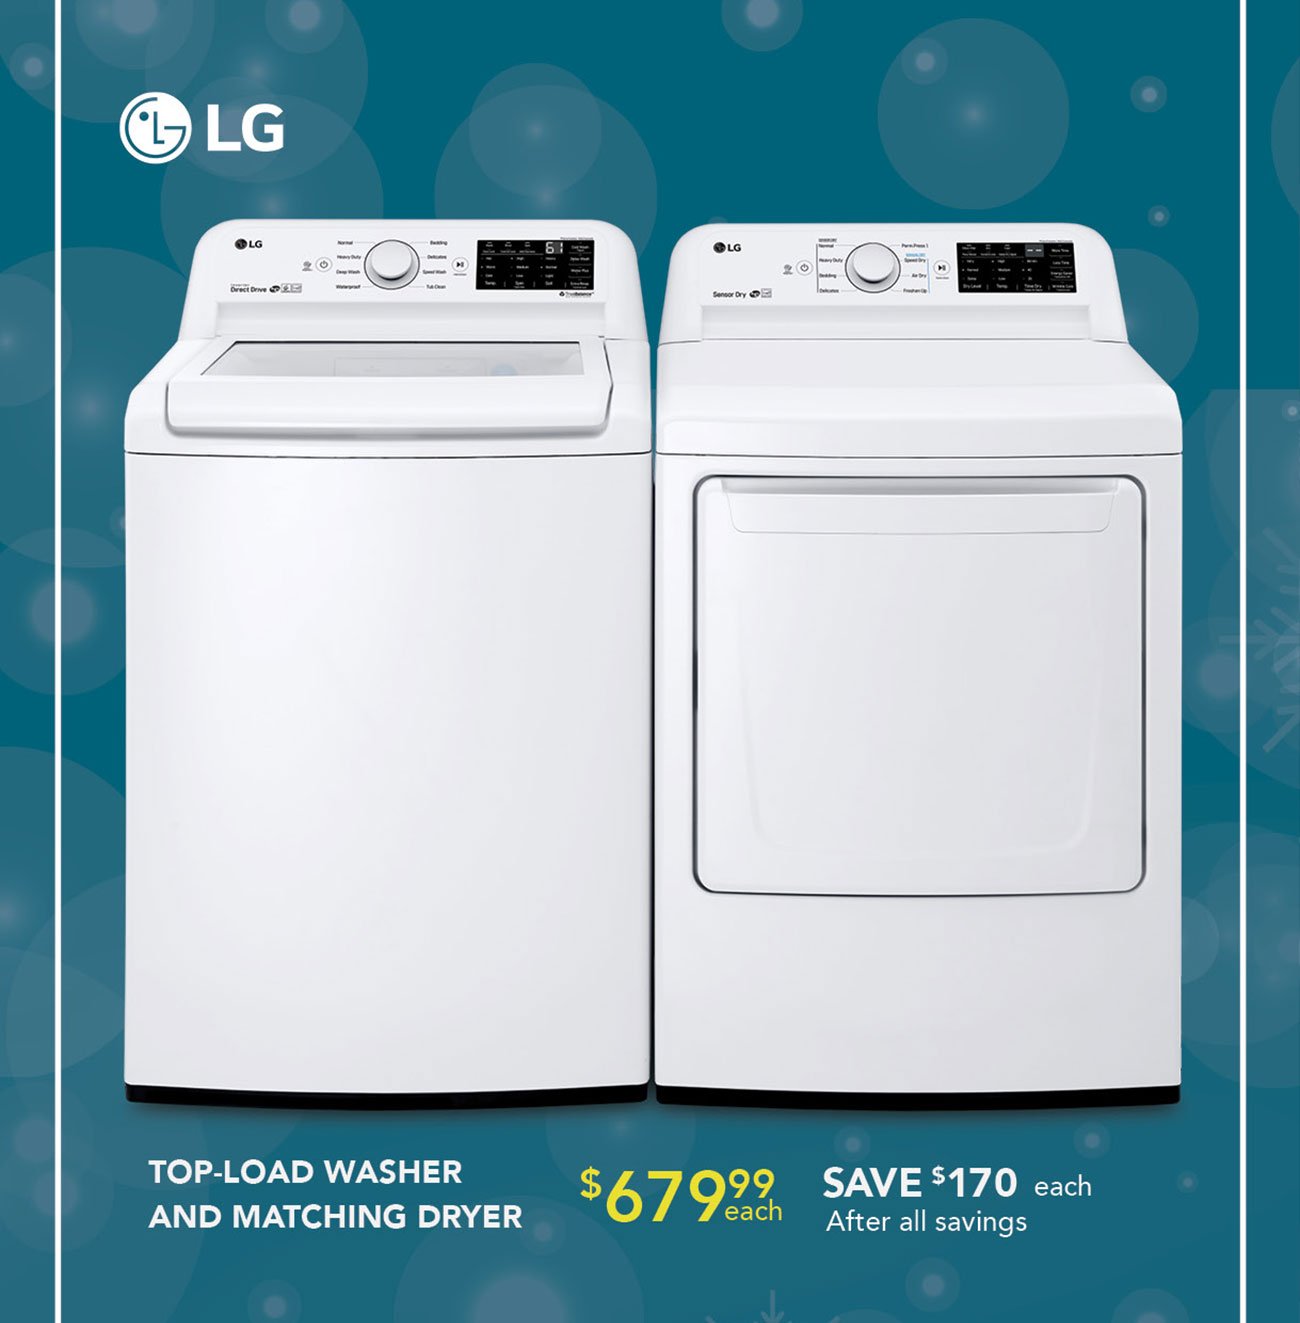 LG-top-load-washer-dryer